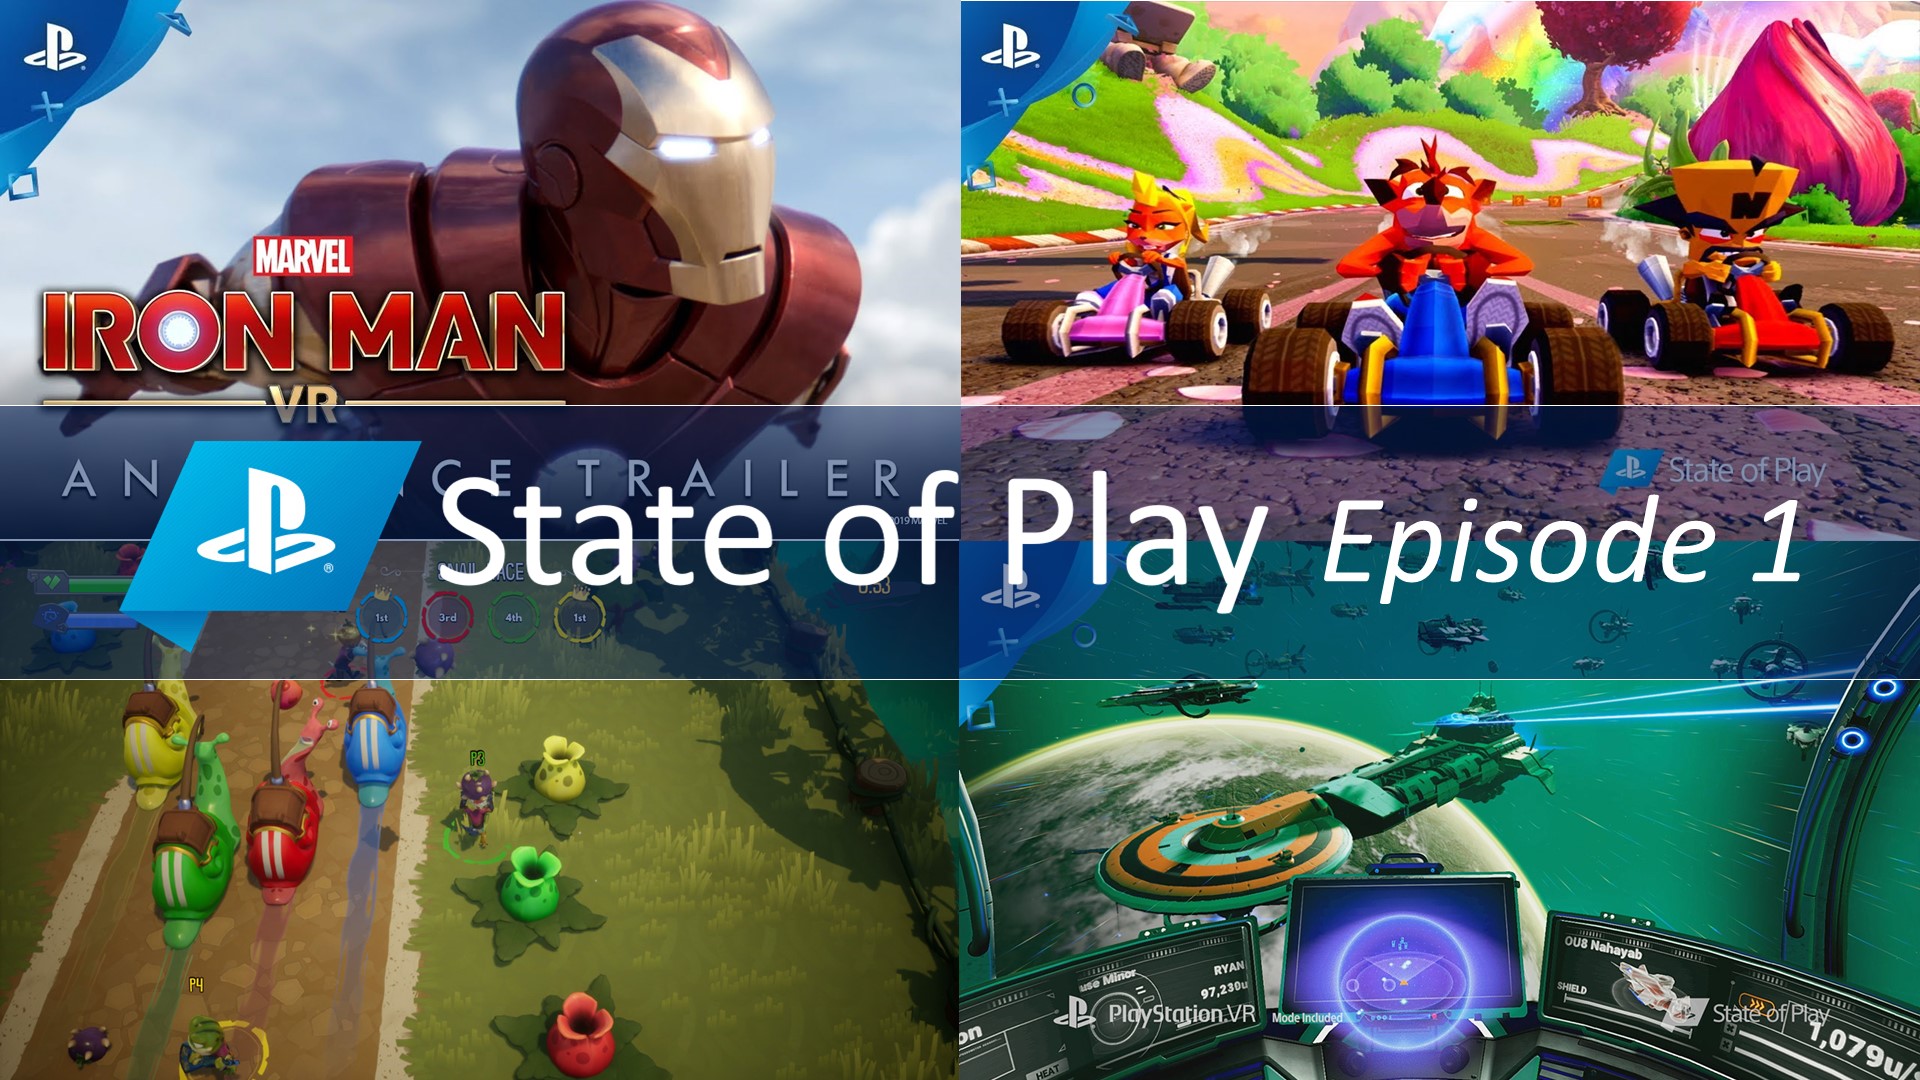 PlayStation State of Play Episode 1 Highlights of the Announcement